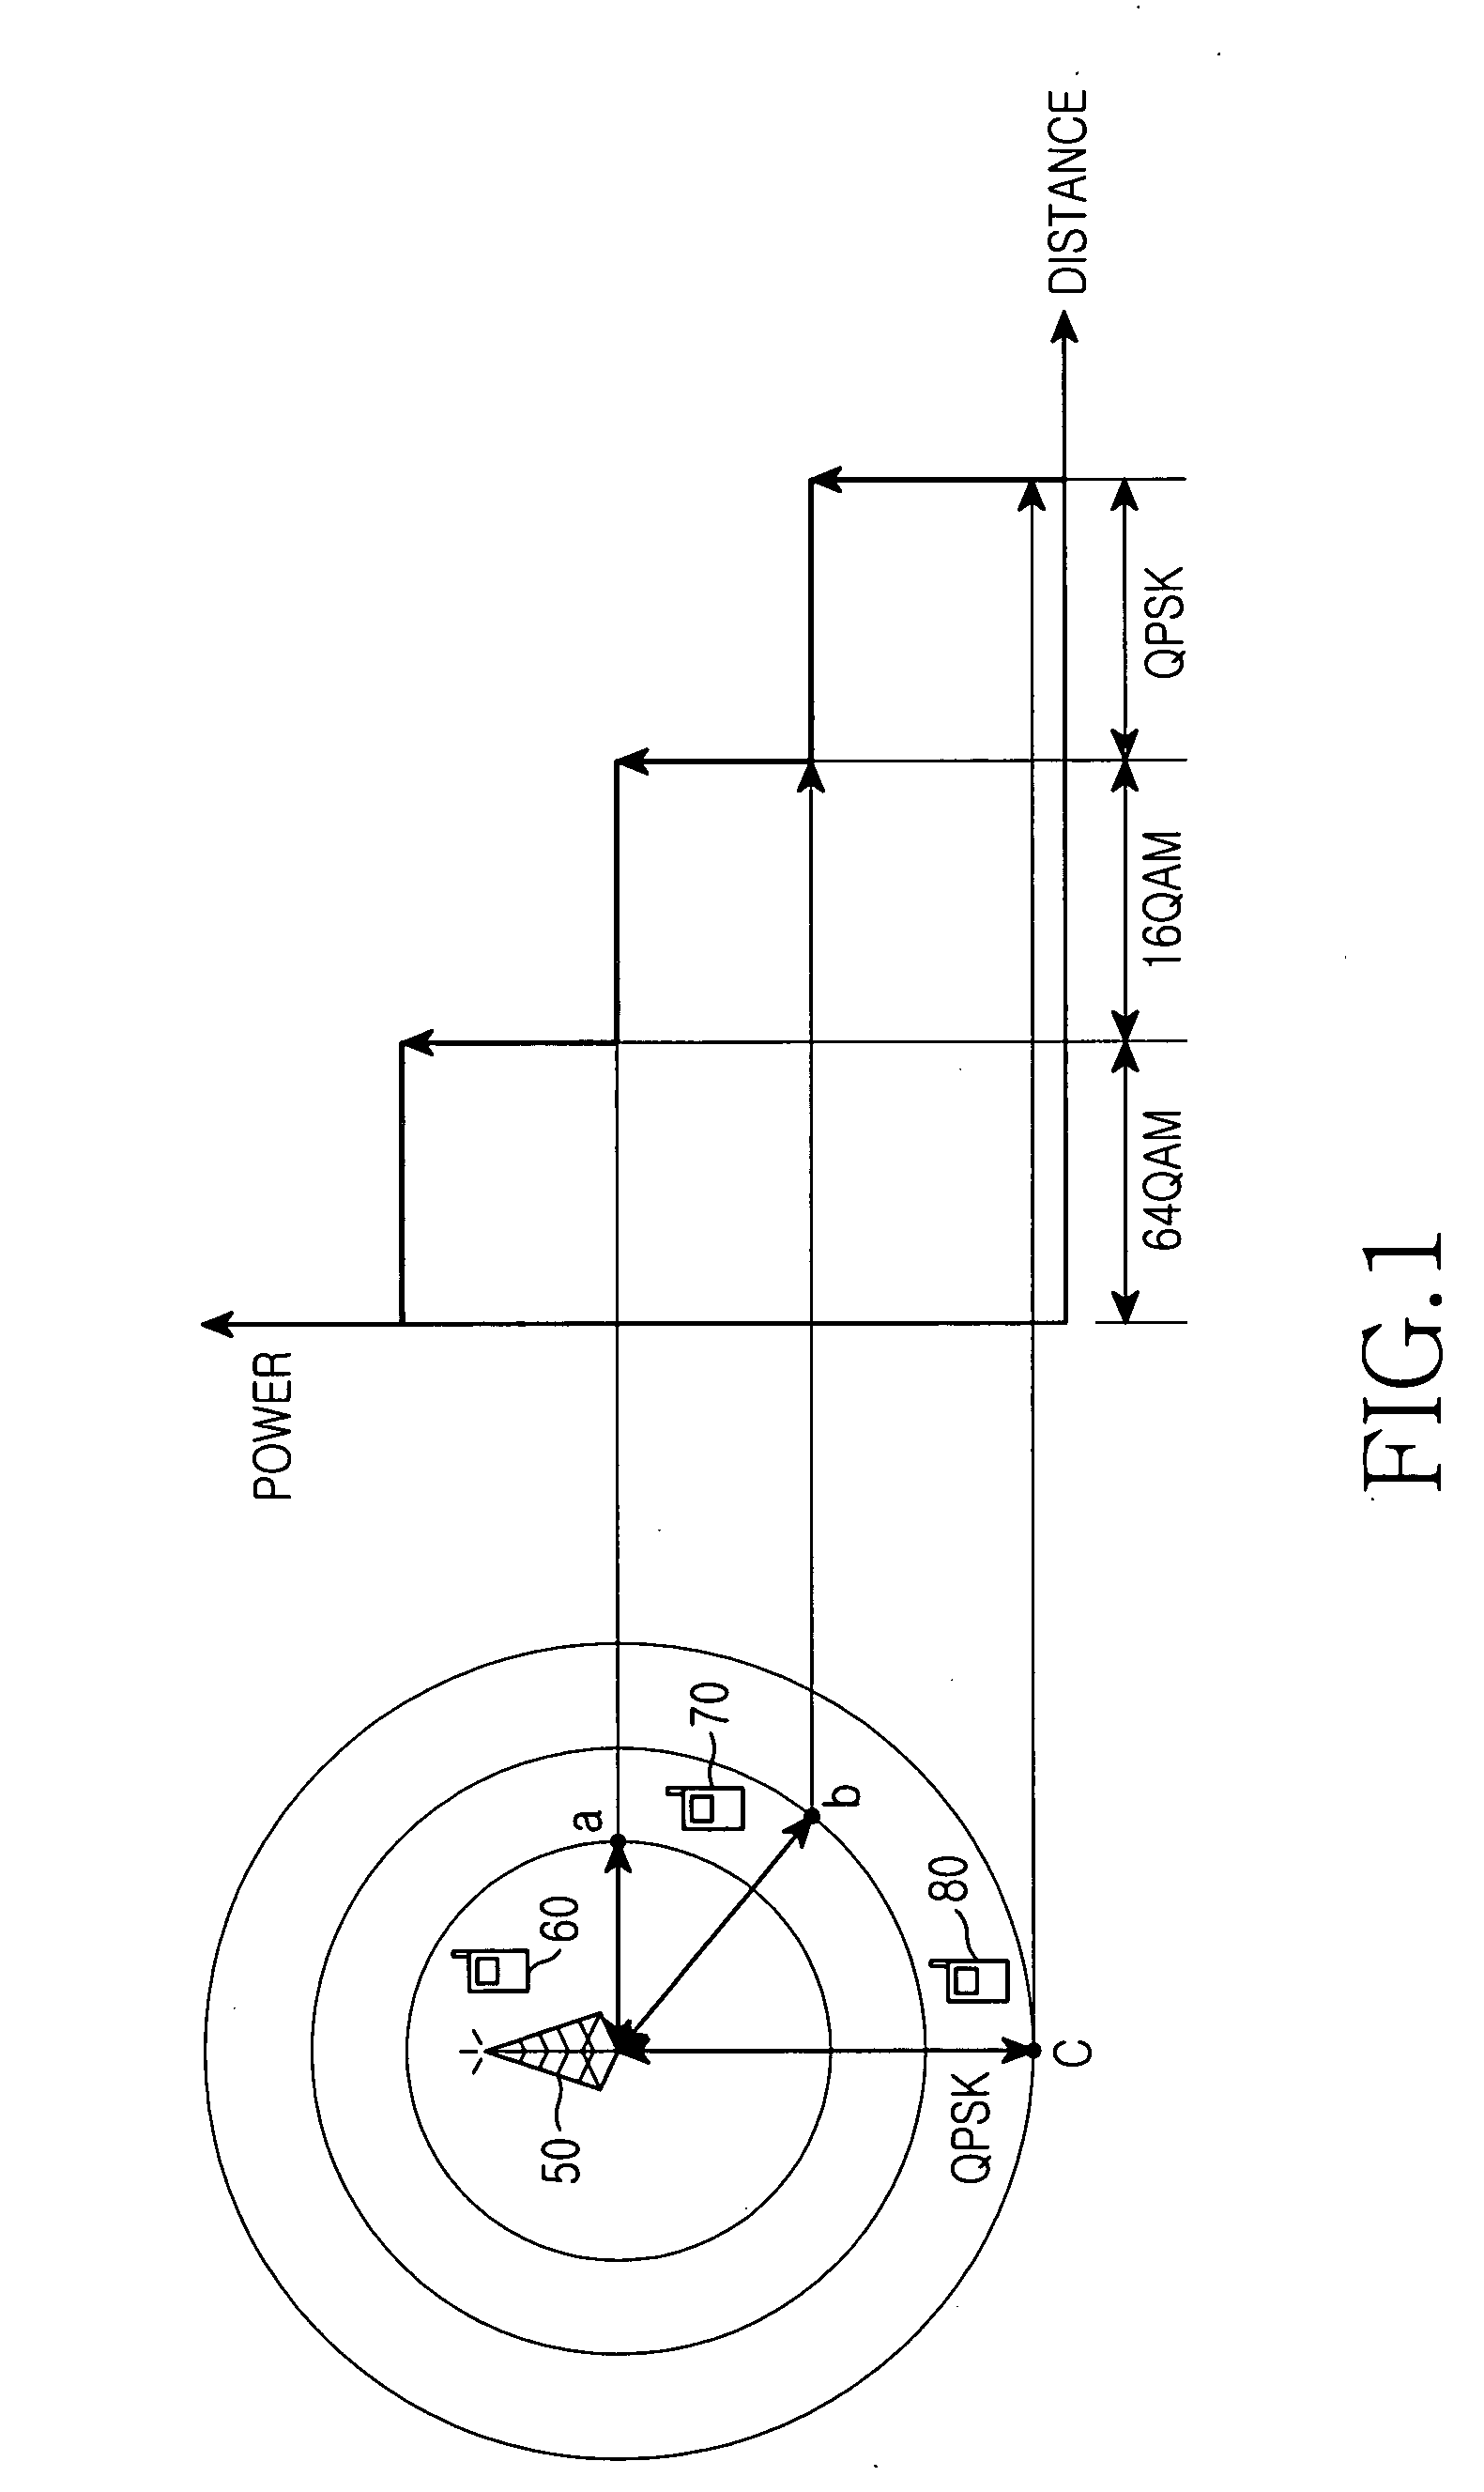 Soft method for variably changing a modulation method according to cell coverage range in a broadband wireless access communication system